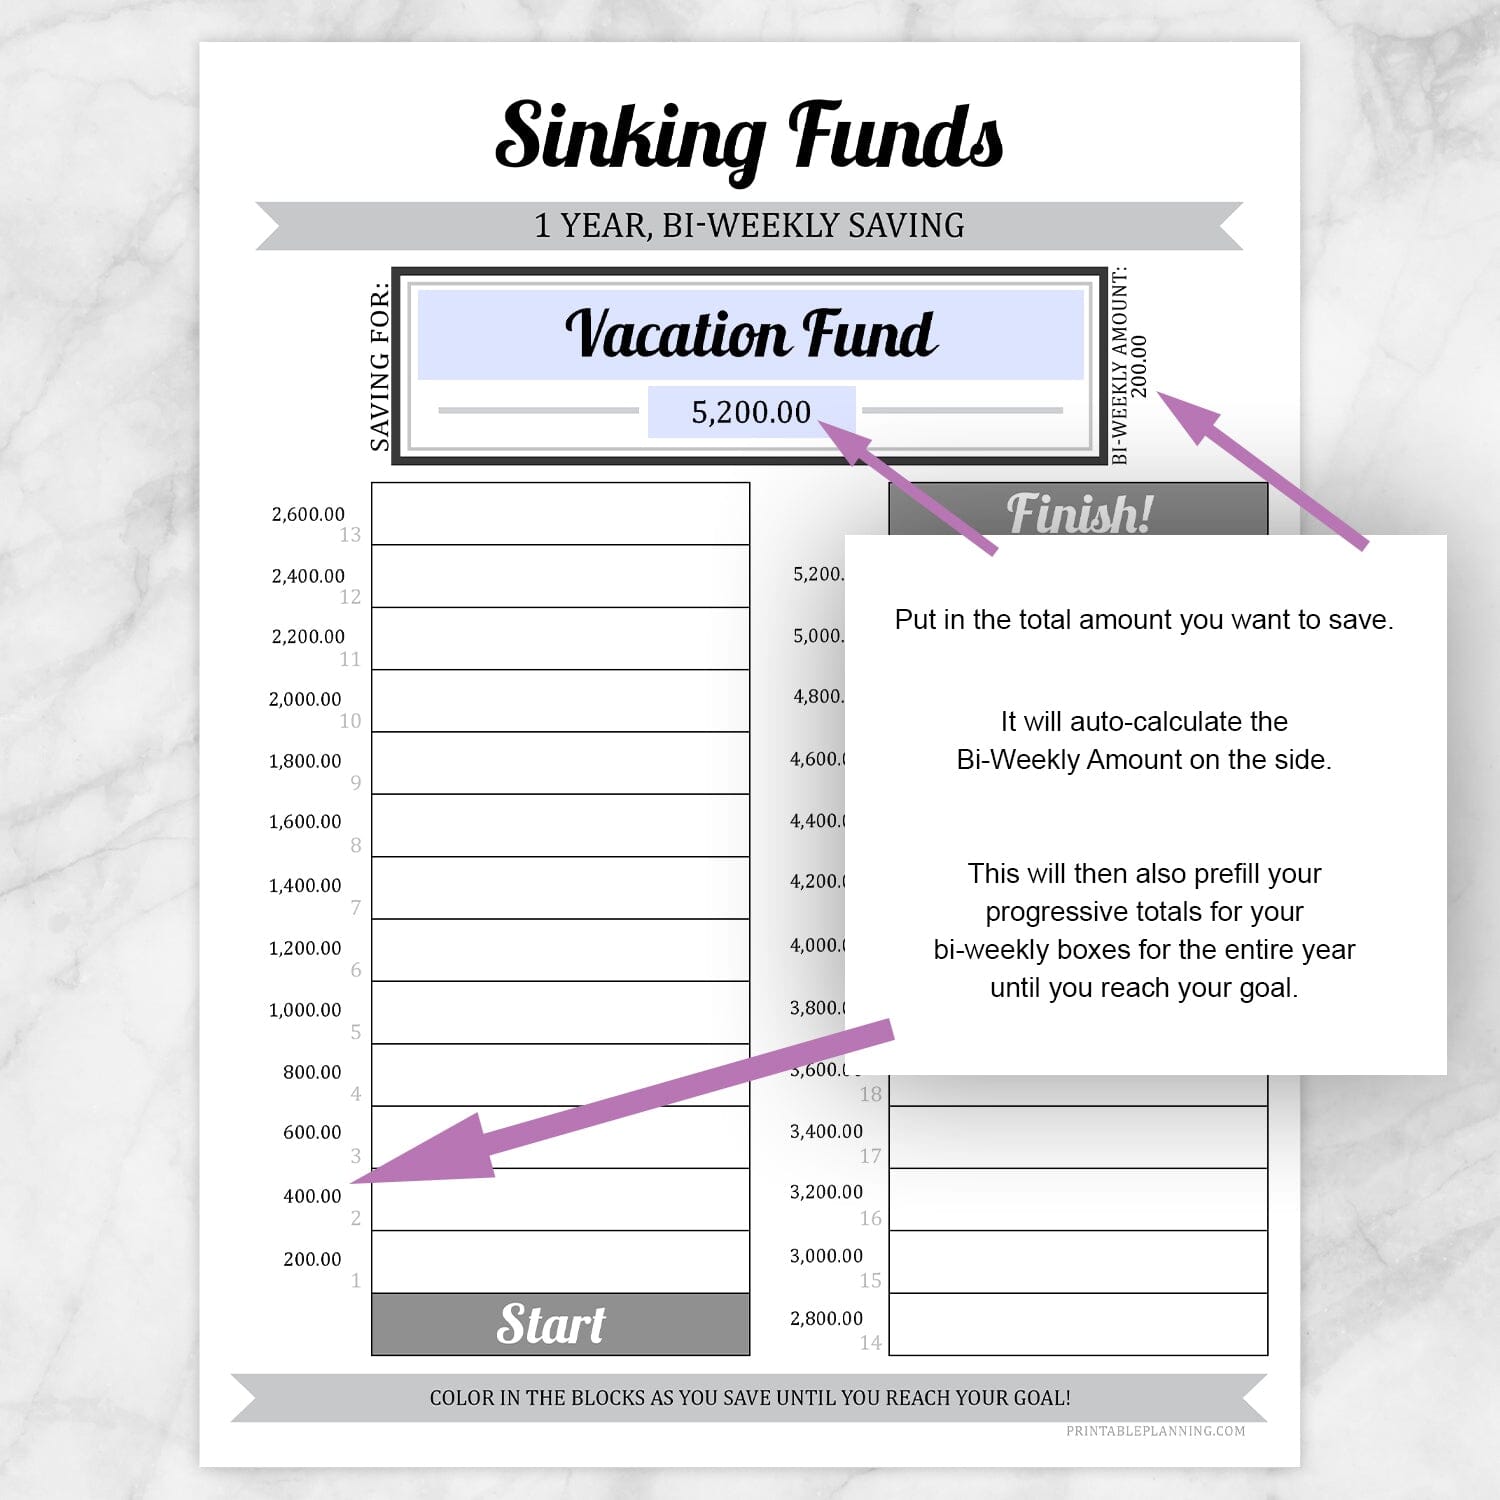 Printable Sinking Funds Savings Chart, 1 Year Bi-Weekly at Printable Planning. Infographic shows how the auto-calculating totals work.